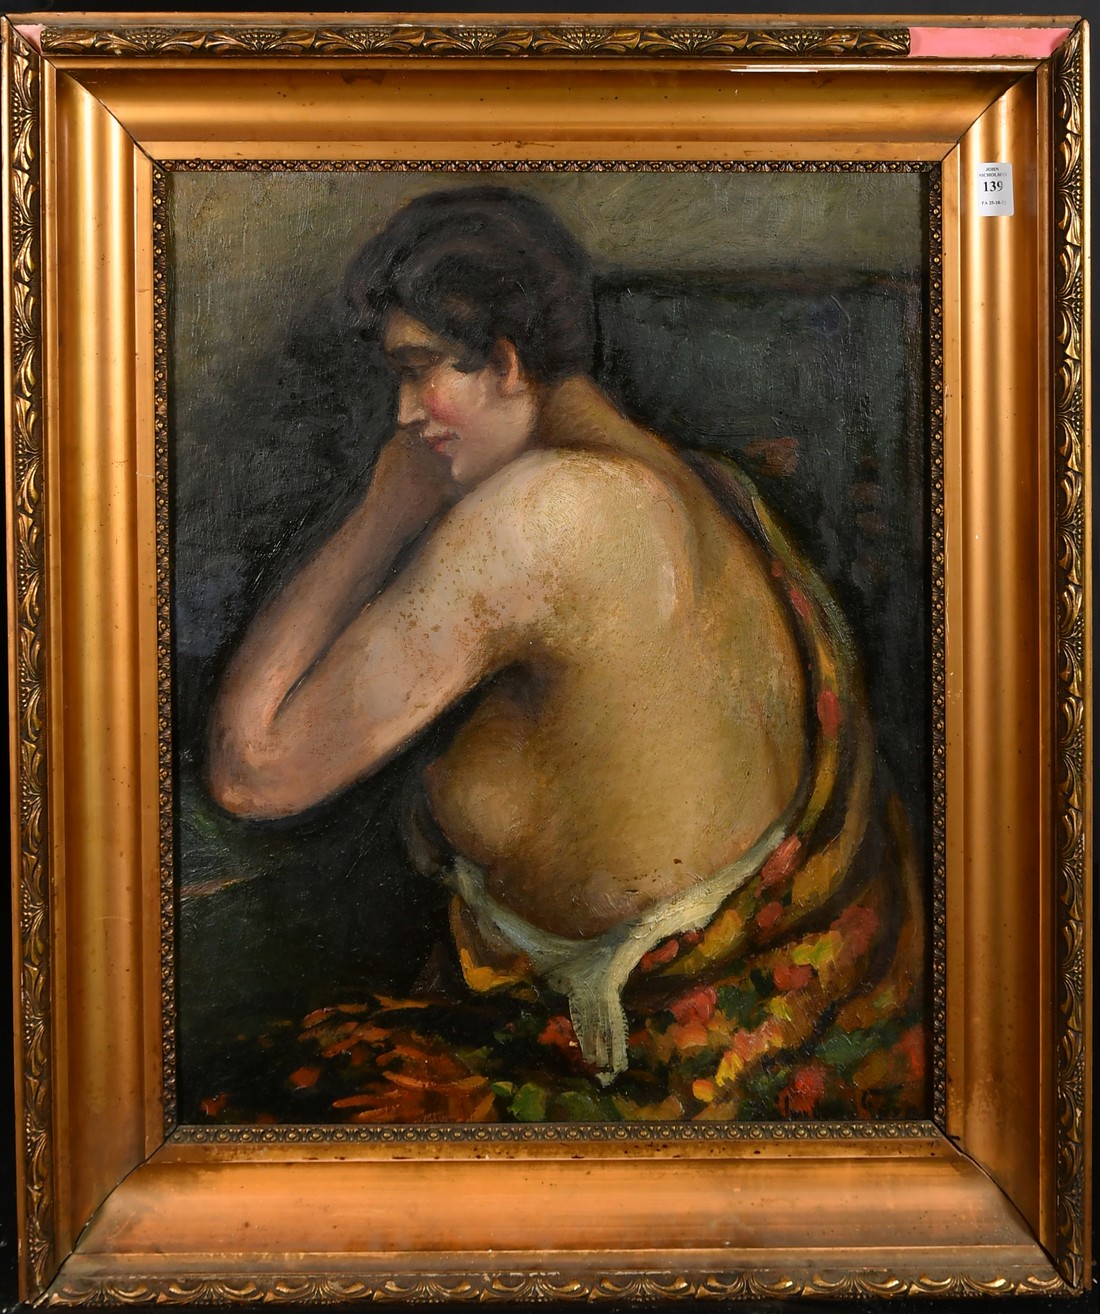 Early 20th Century French School, study of a female figure, oil on board, indistinctly signed, 23" x - Image 2 of 4